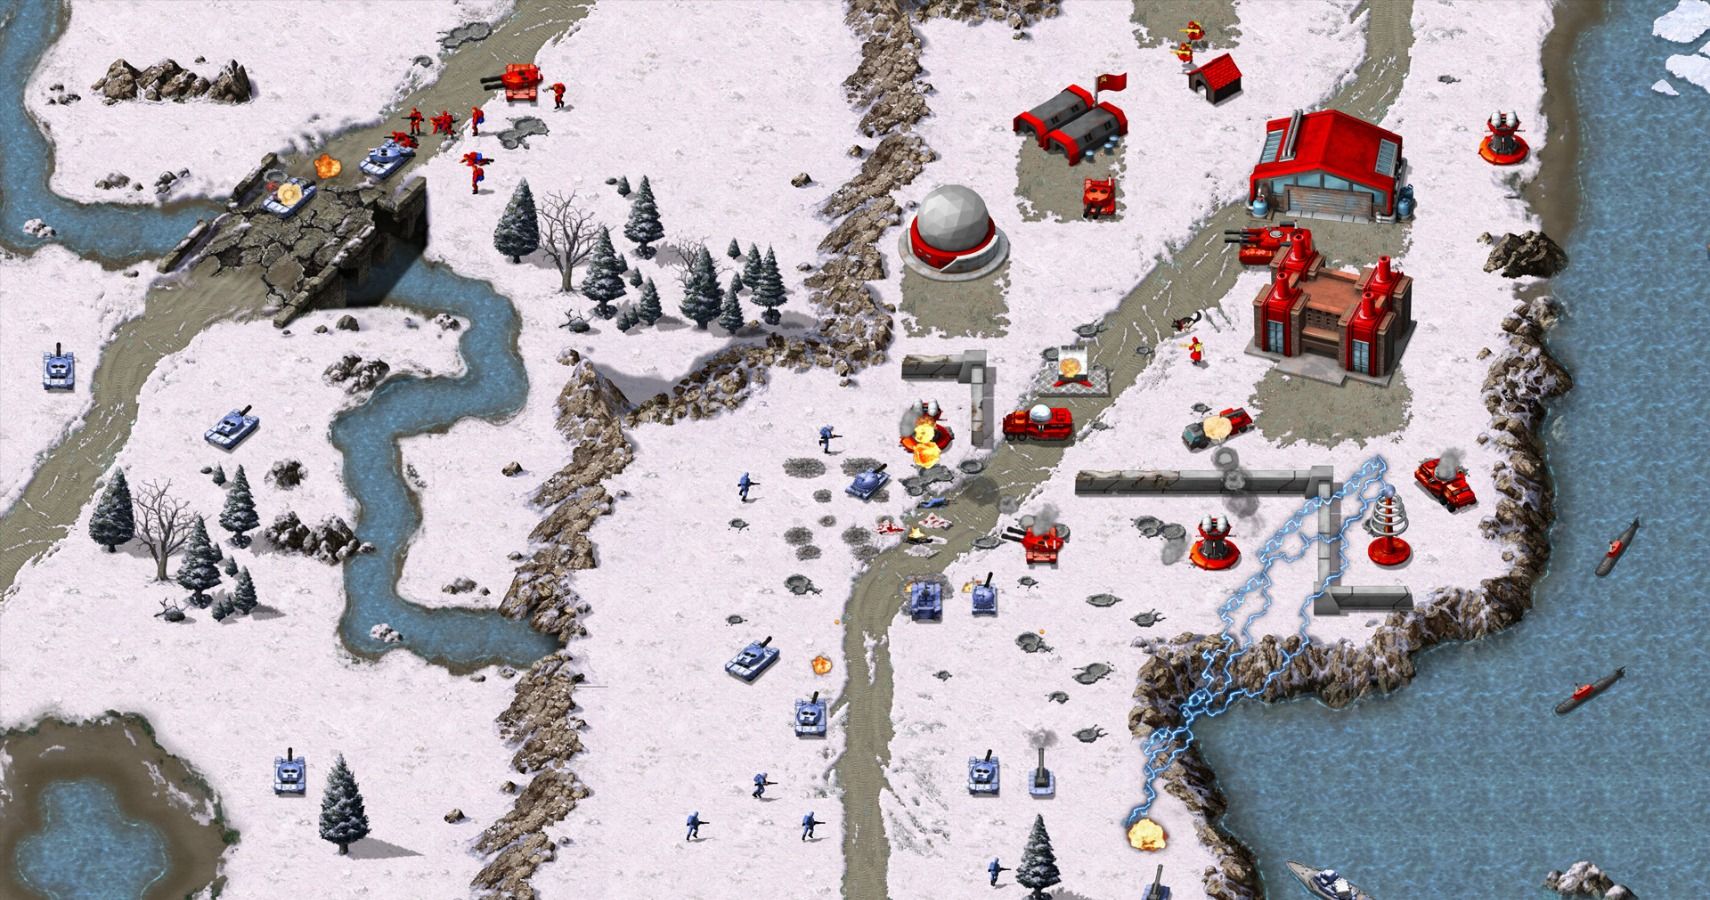 Command & Conquer Remastered Collection launches on Steam